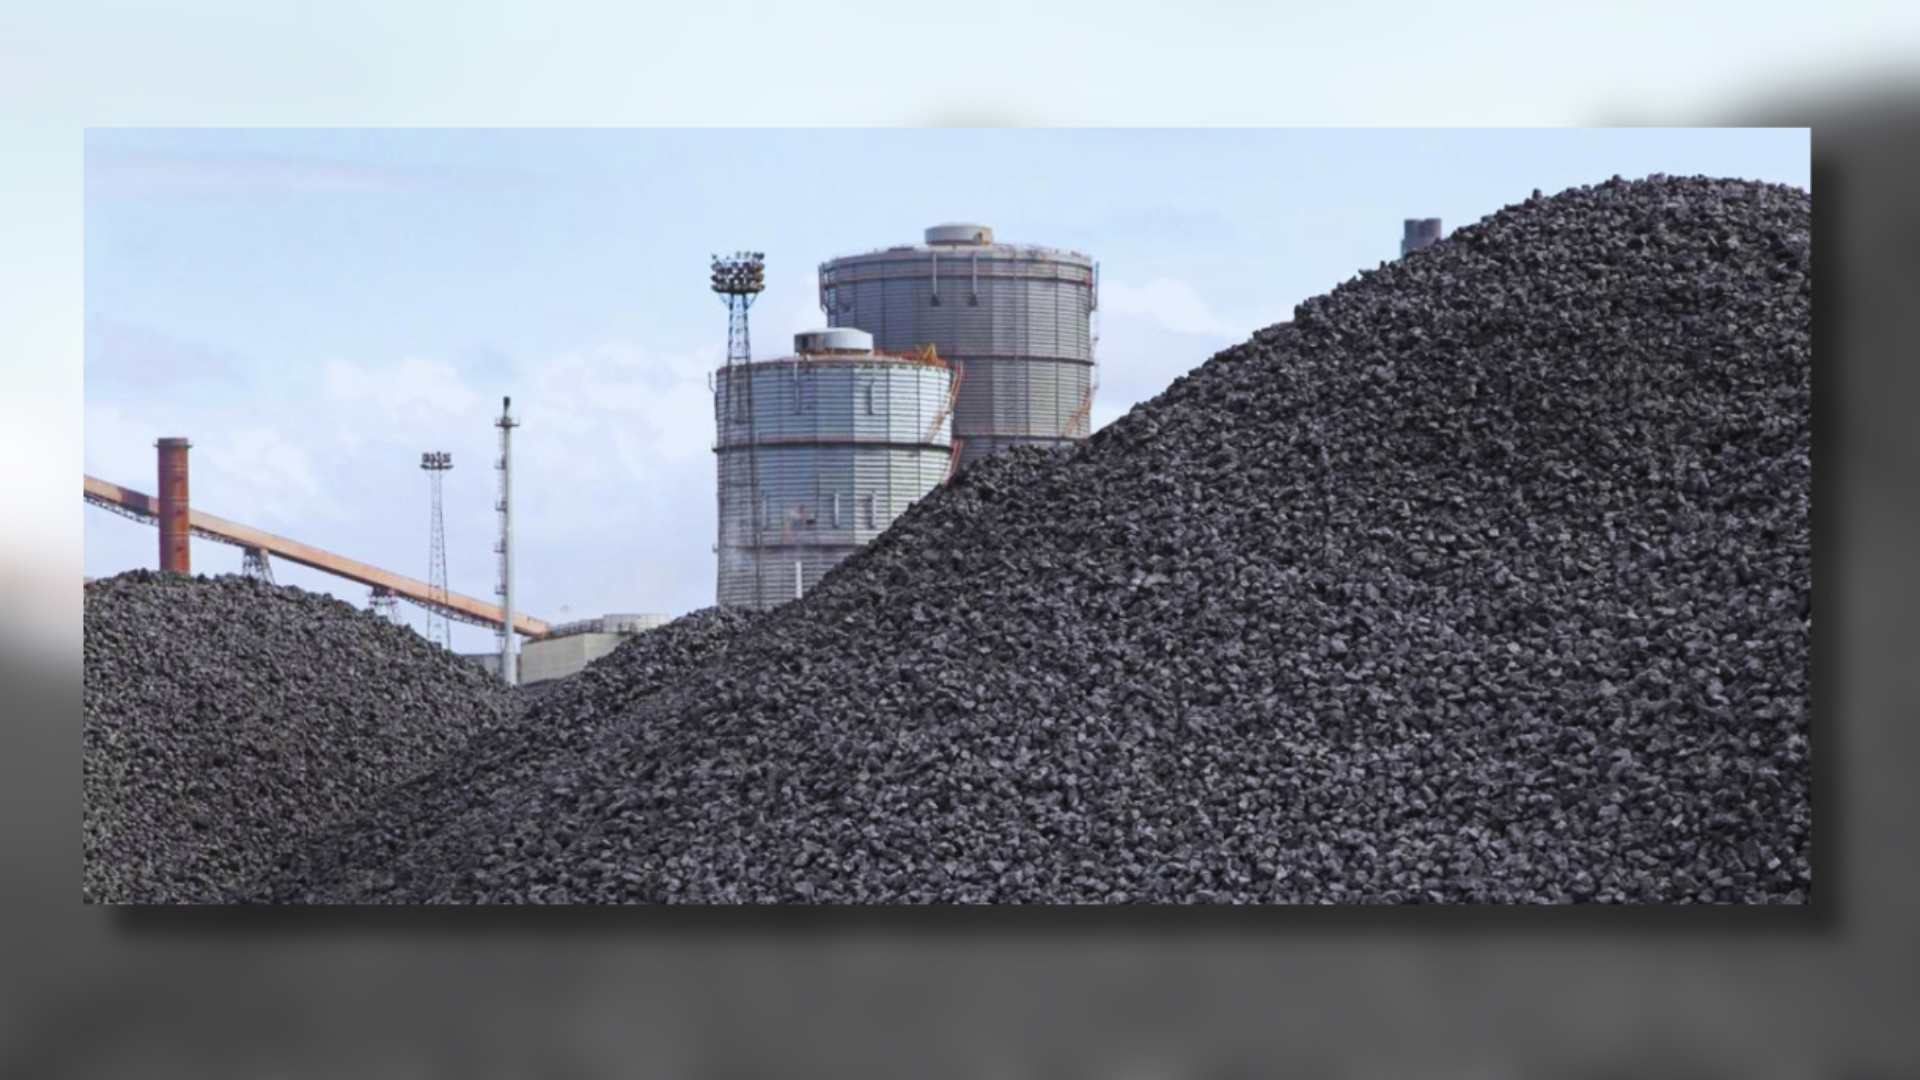 Report Emphasizes Coal’s Continuing Dominance In Indian Energy Sector For Next Two Decades, Calls For Active Phase-Down Policies